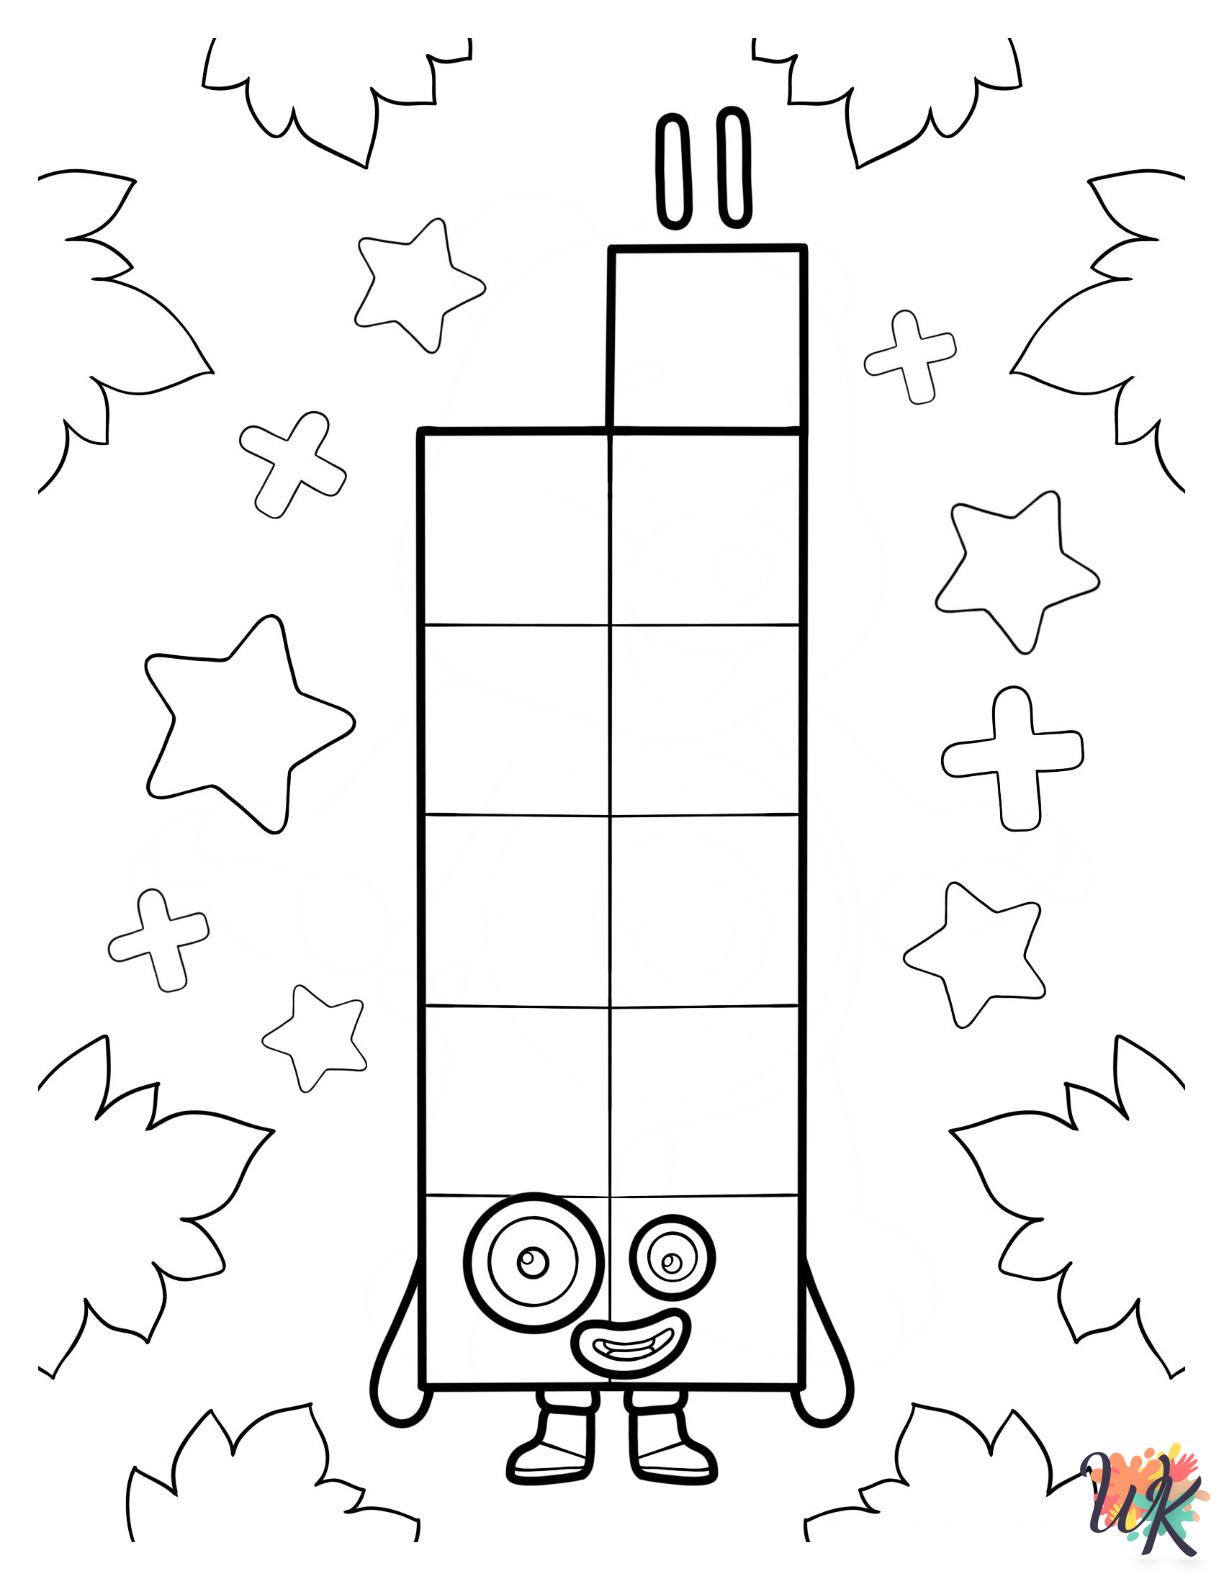 Numberblocks ornaments coloring pages